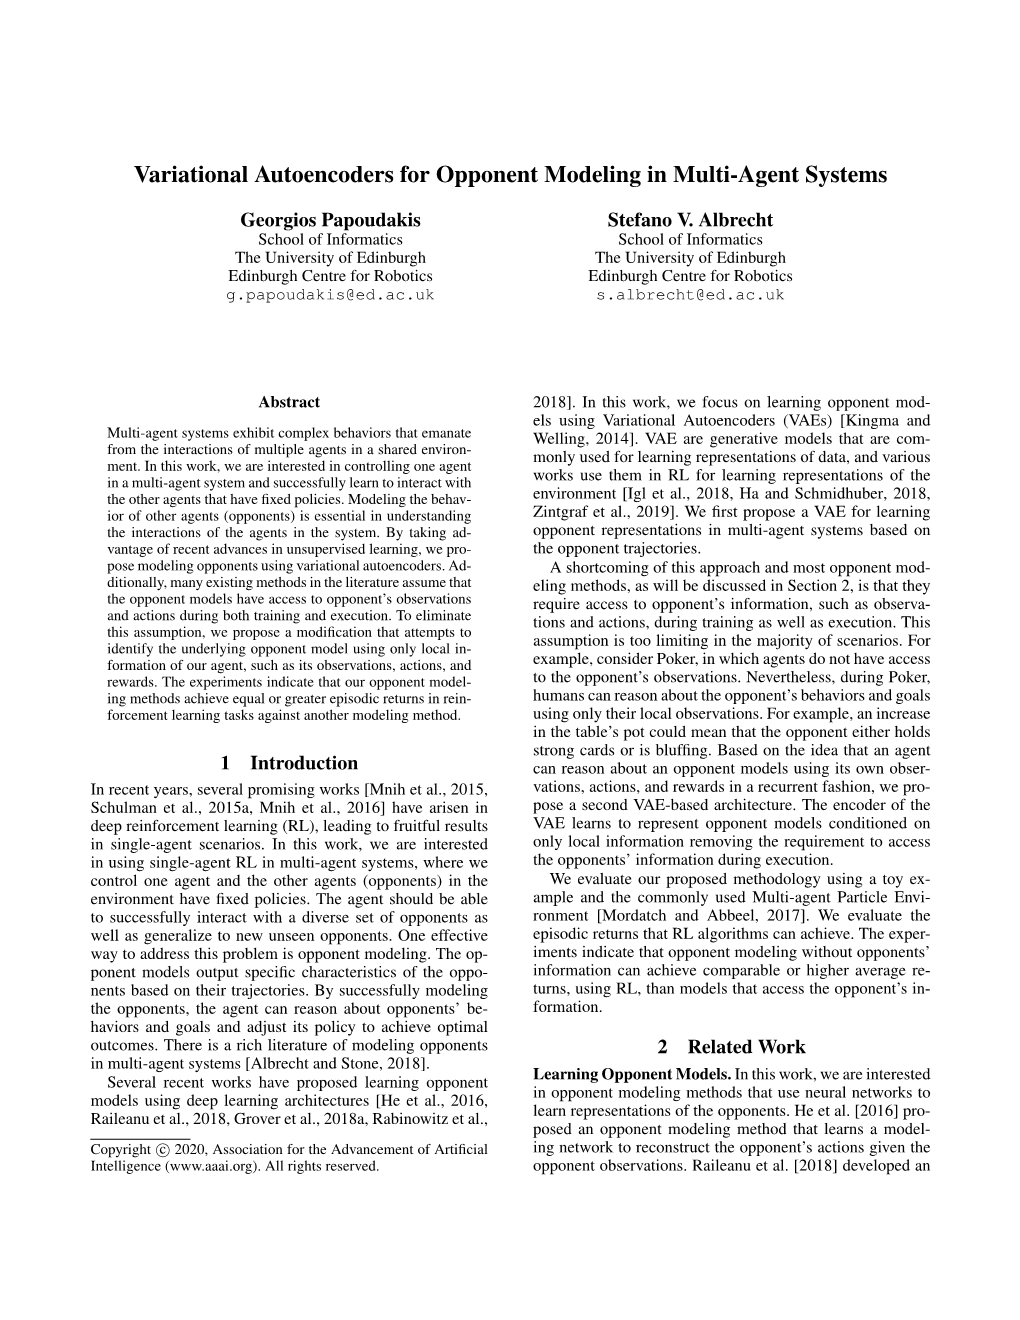 Variational Autoencoders for Opponent Modeling in Multi-Agent Systems